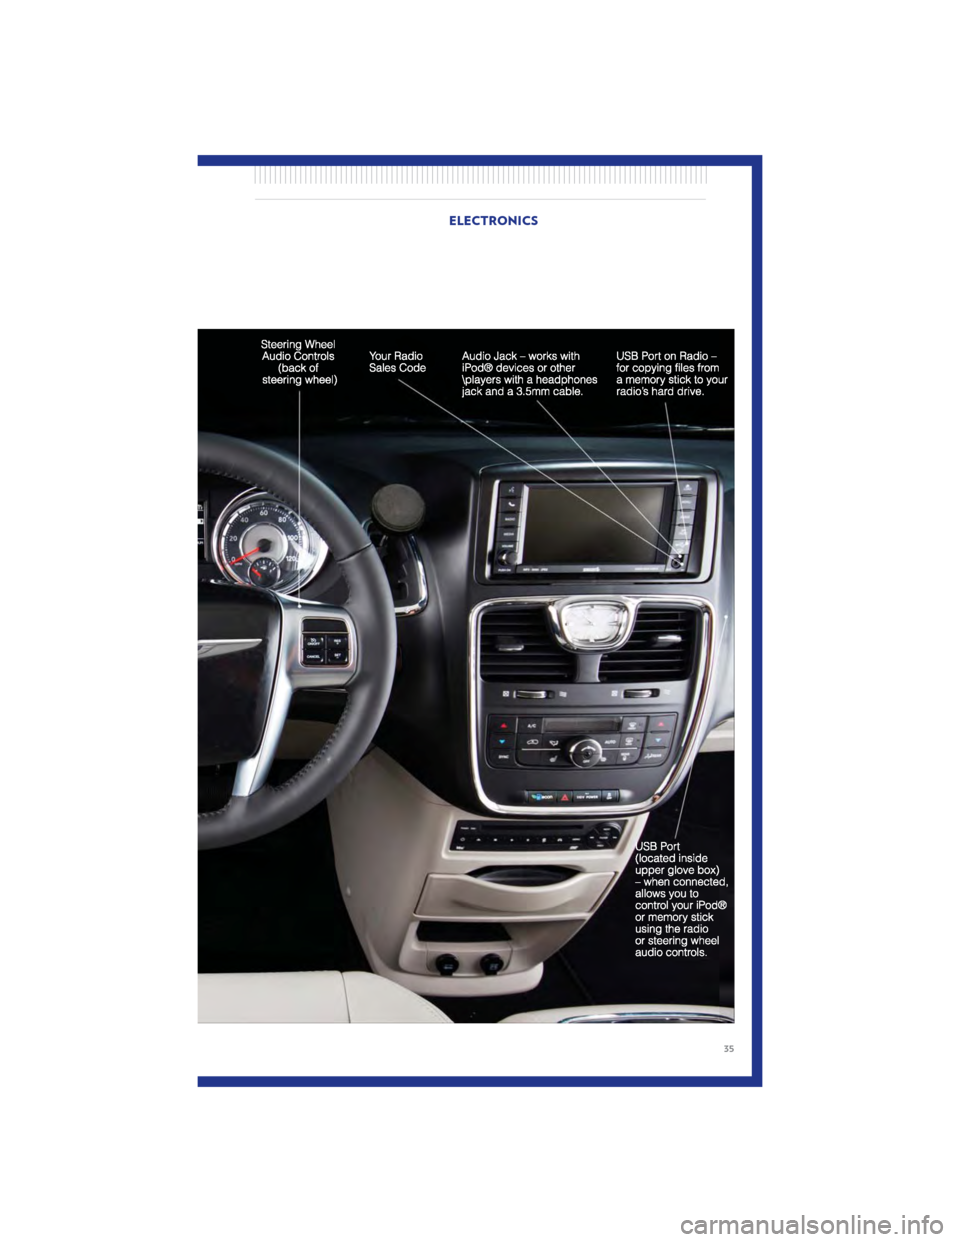 CHRYSLER TOWN AND COUNTRY 2011 5.G Owners Guide ELECTRONICS
35 